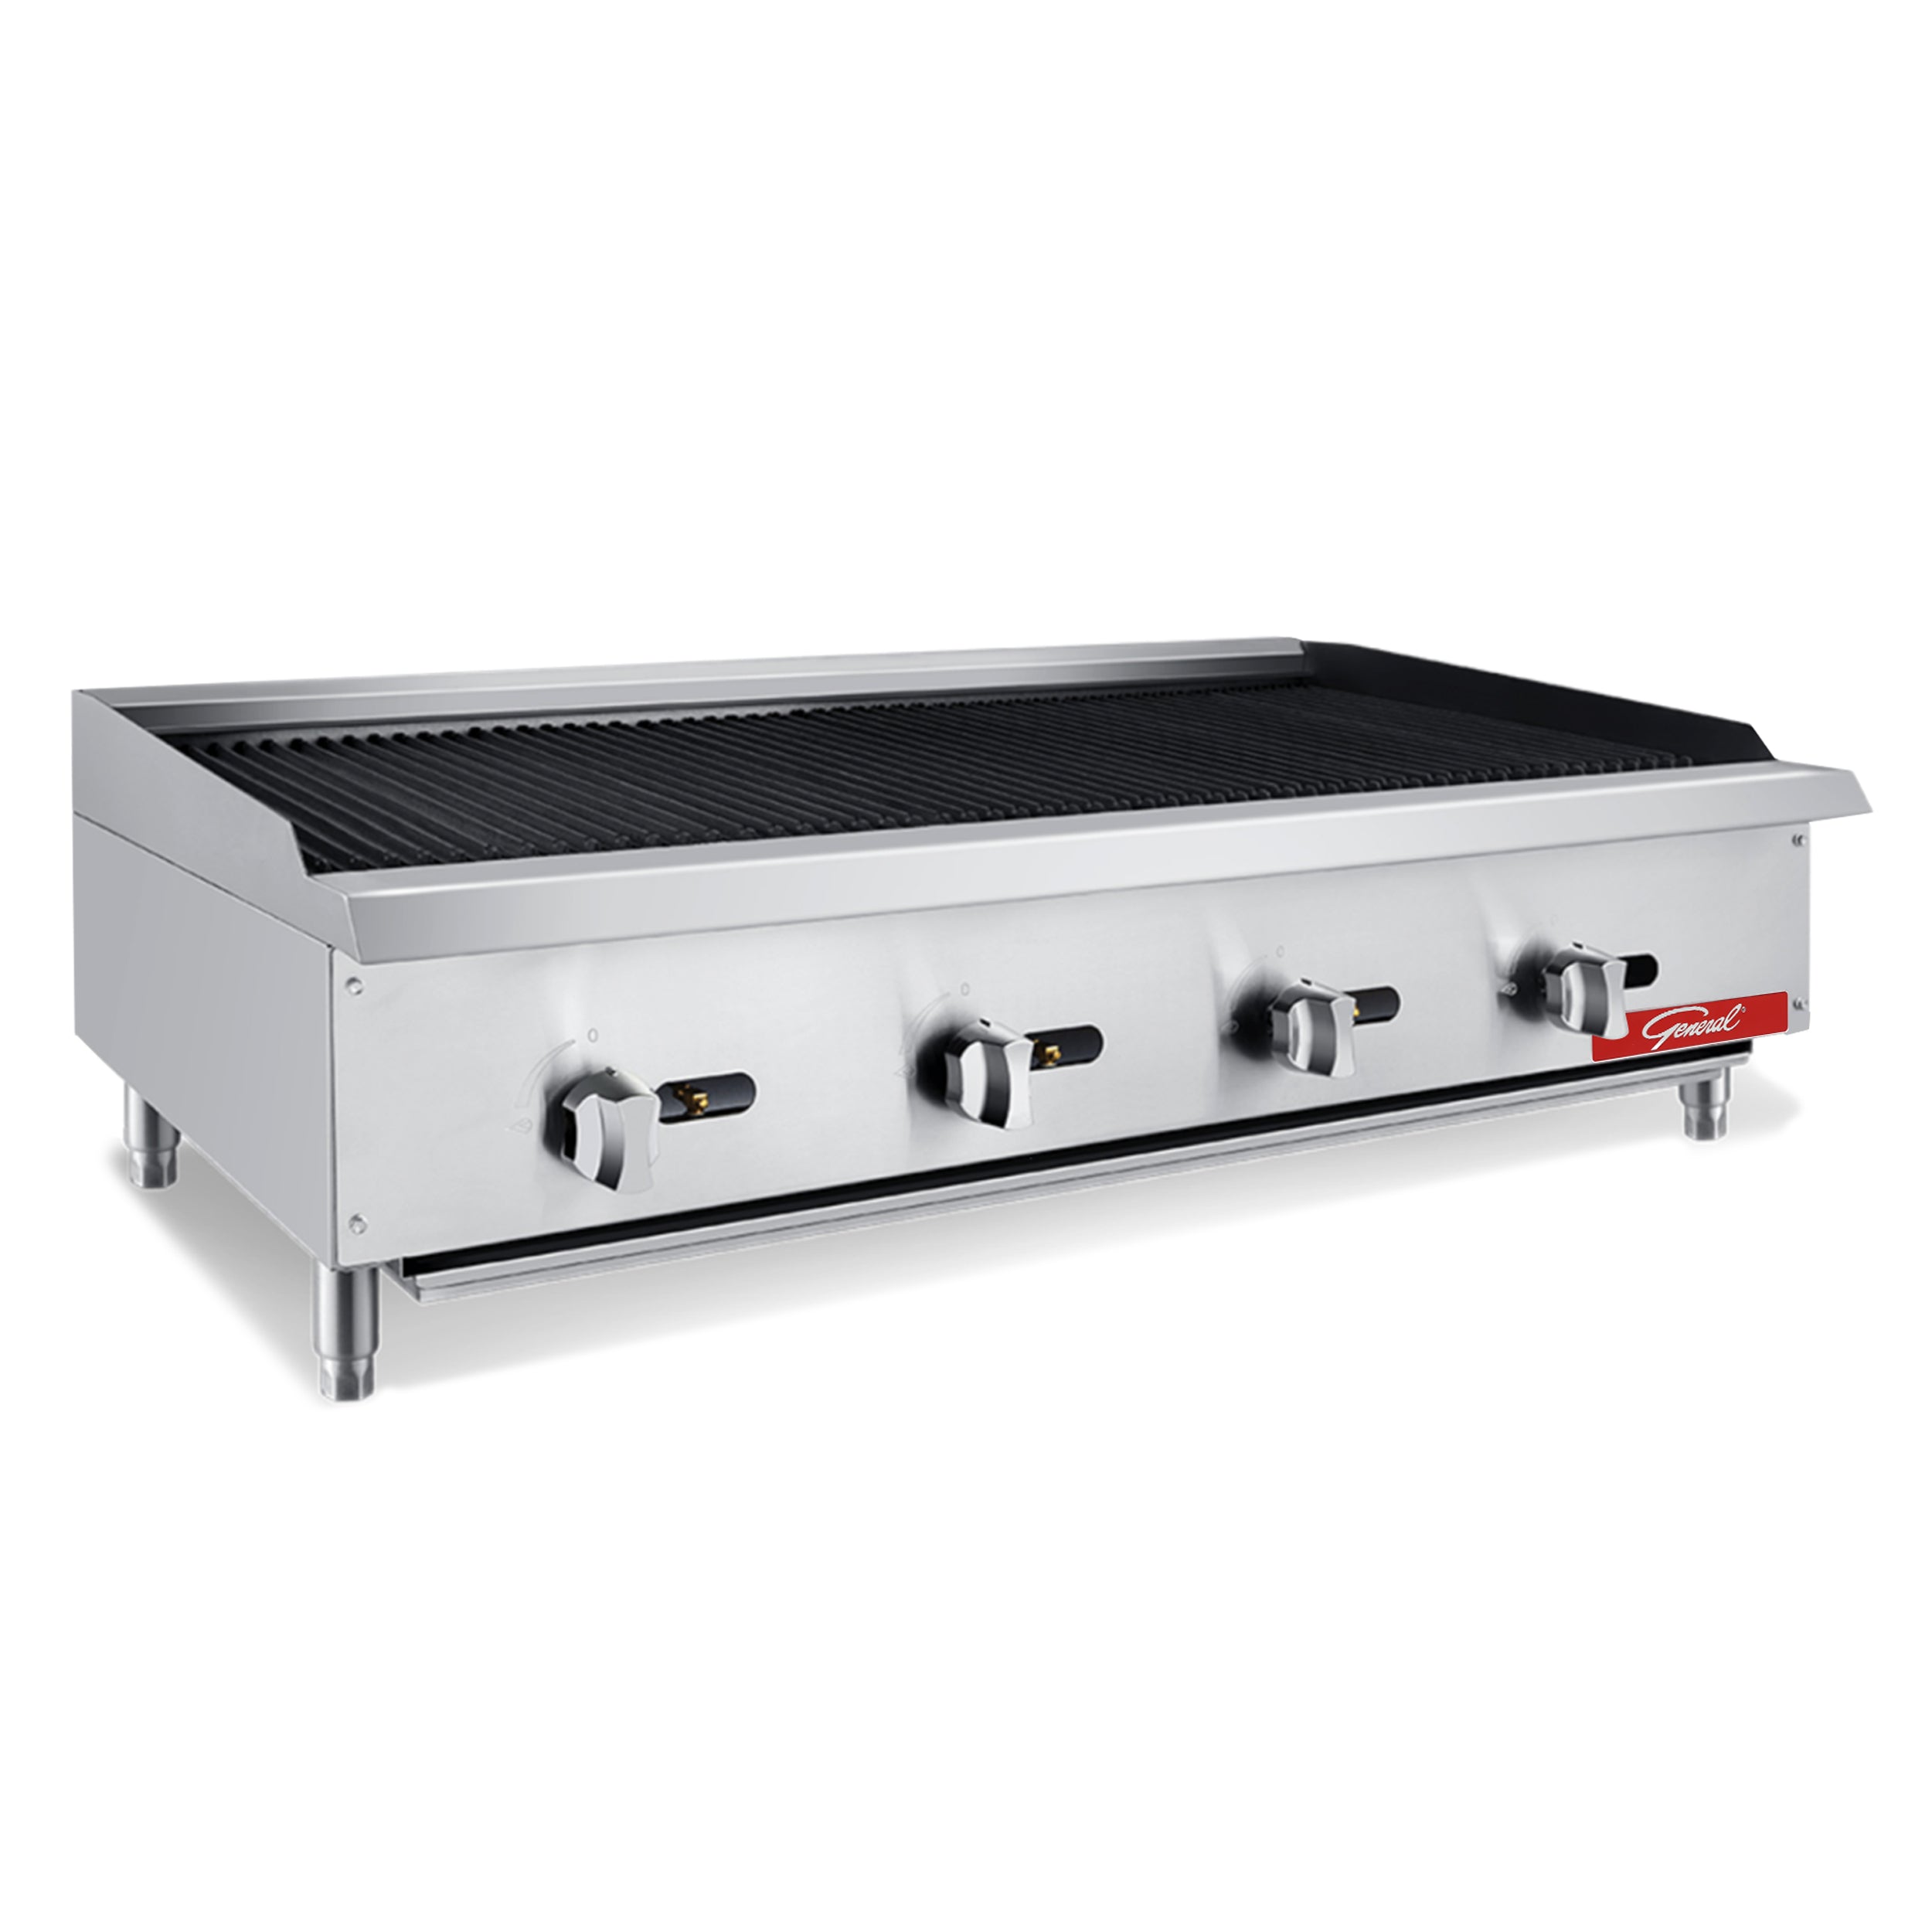 Therma-Tek TC48-48RB 48 Radiant Gas Char Broiler - MADE IN THE USA!  Natural Gas